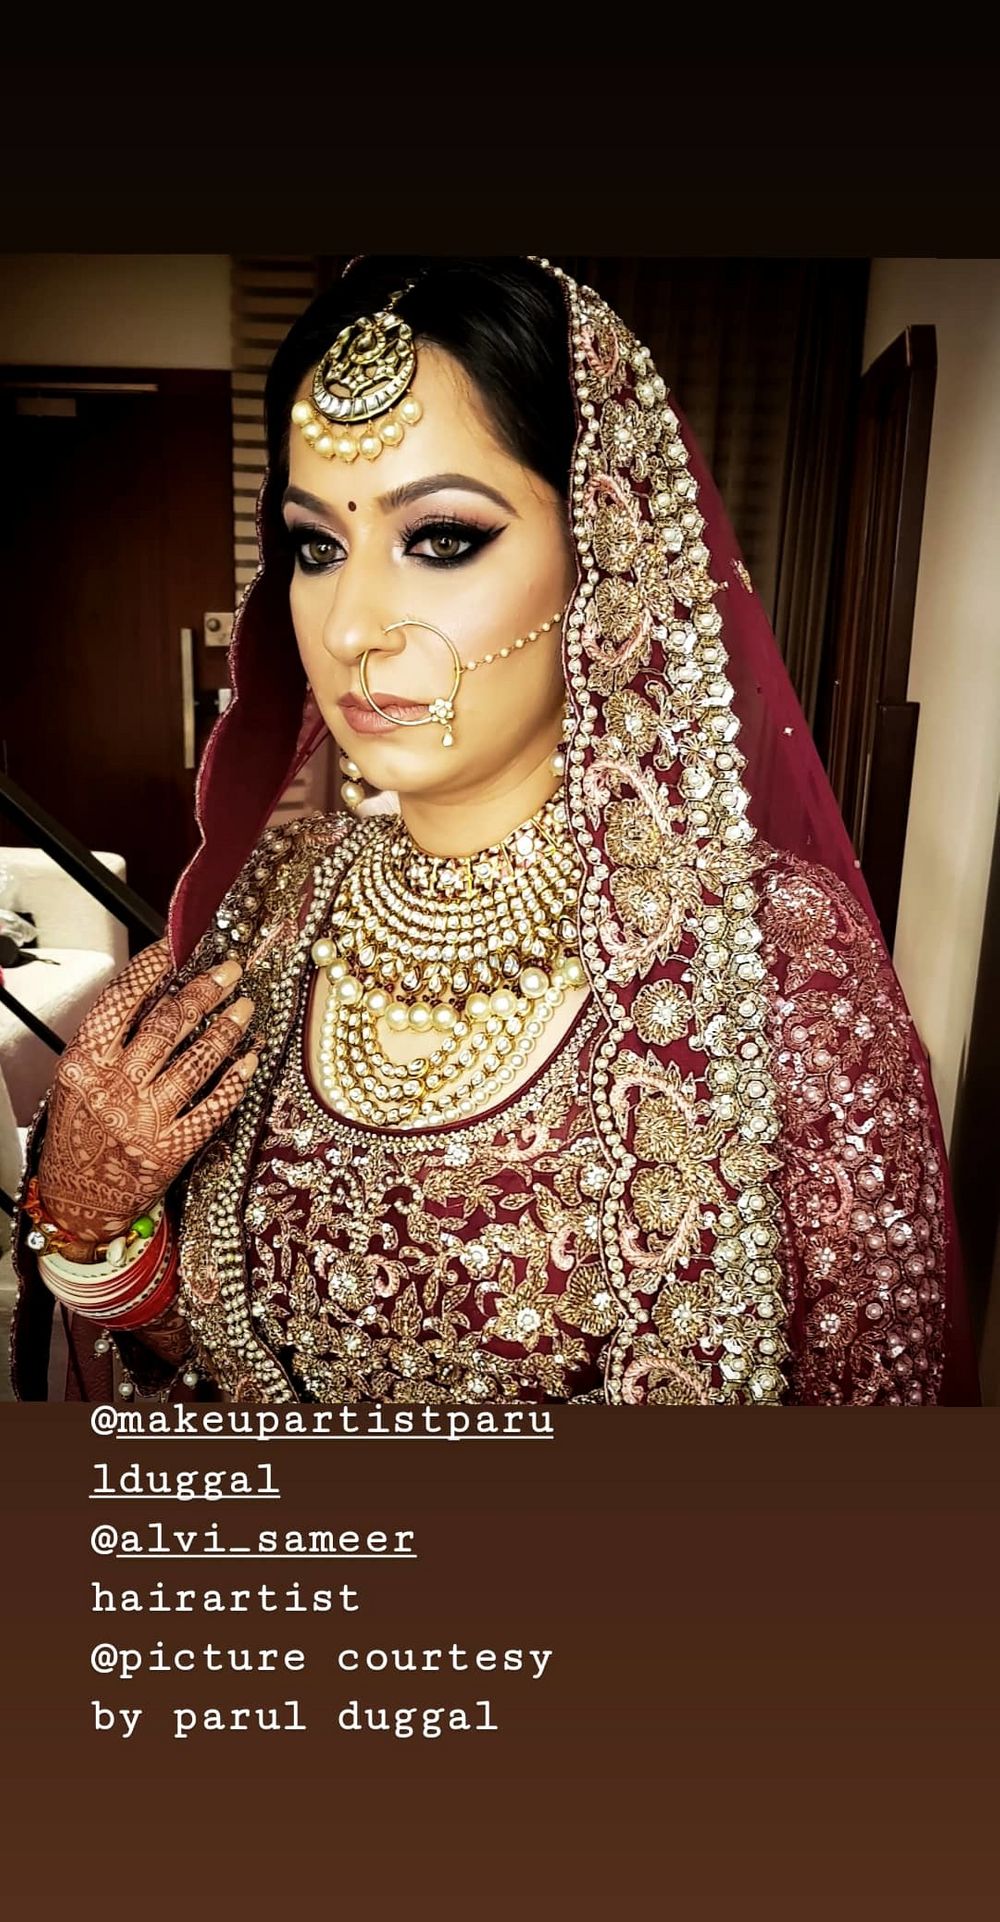 Photo From 2019 Brides - By Makeup Artist Parulduggal